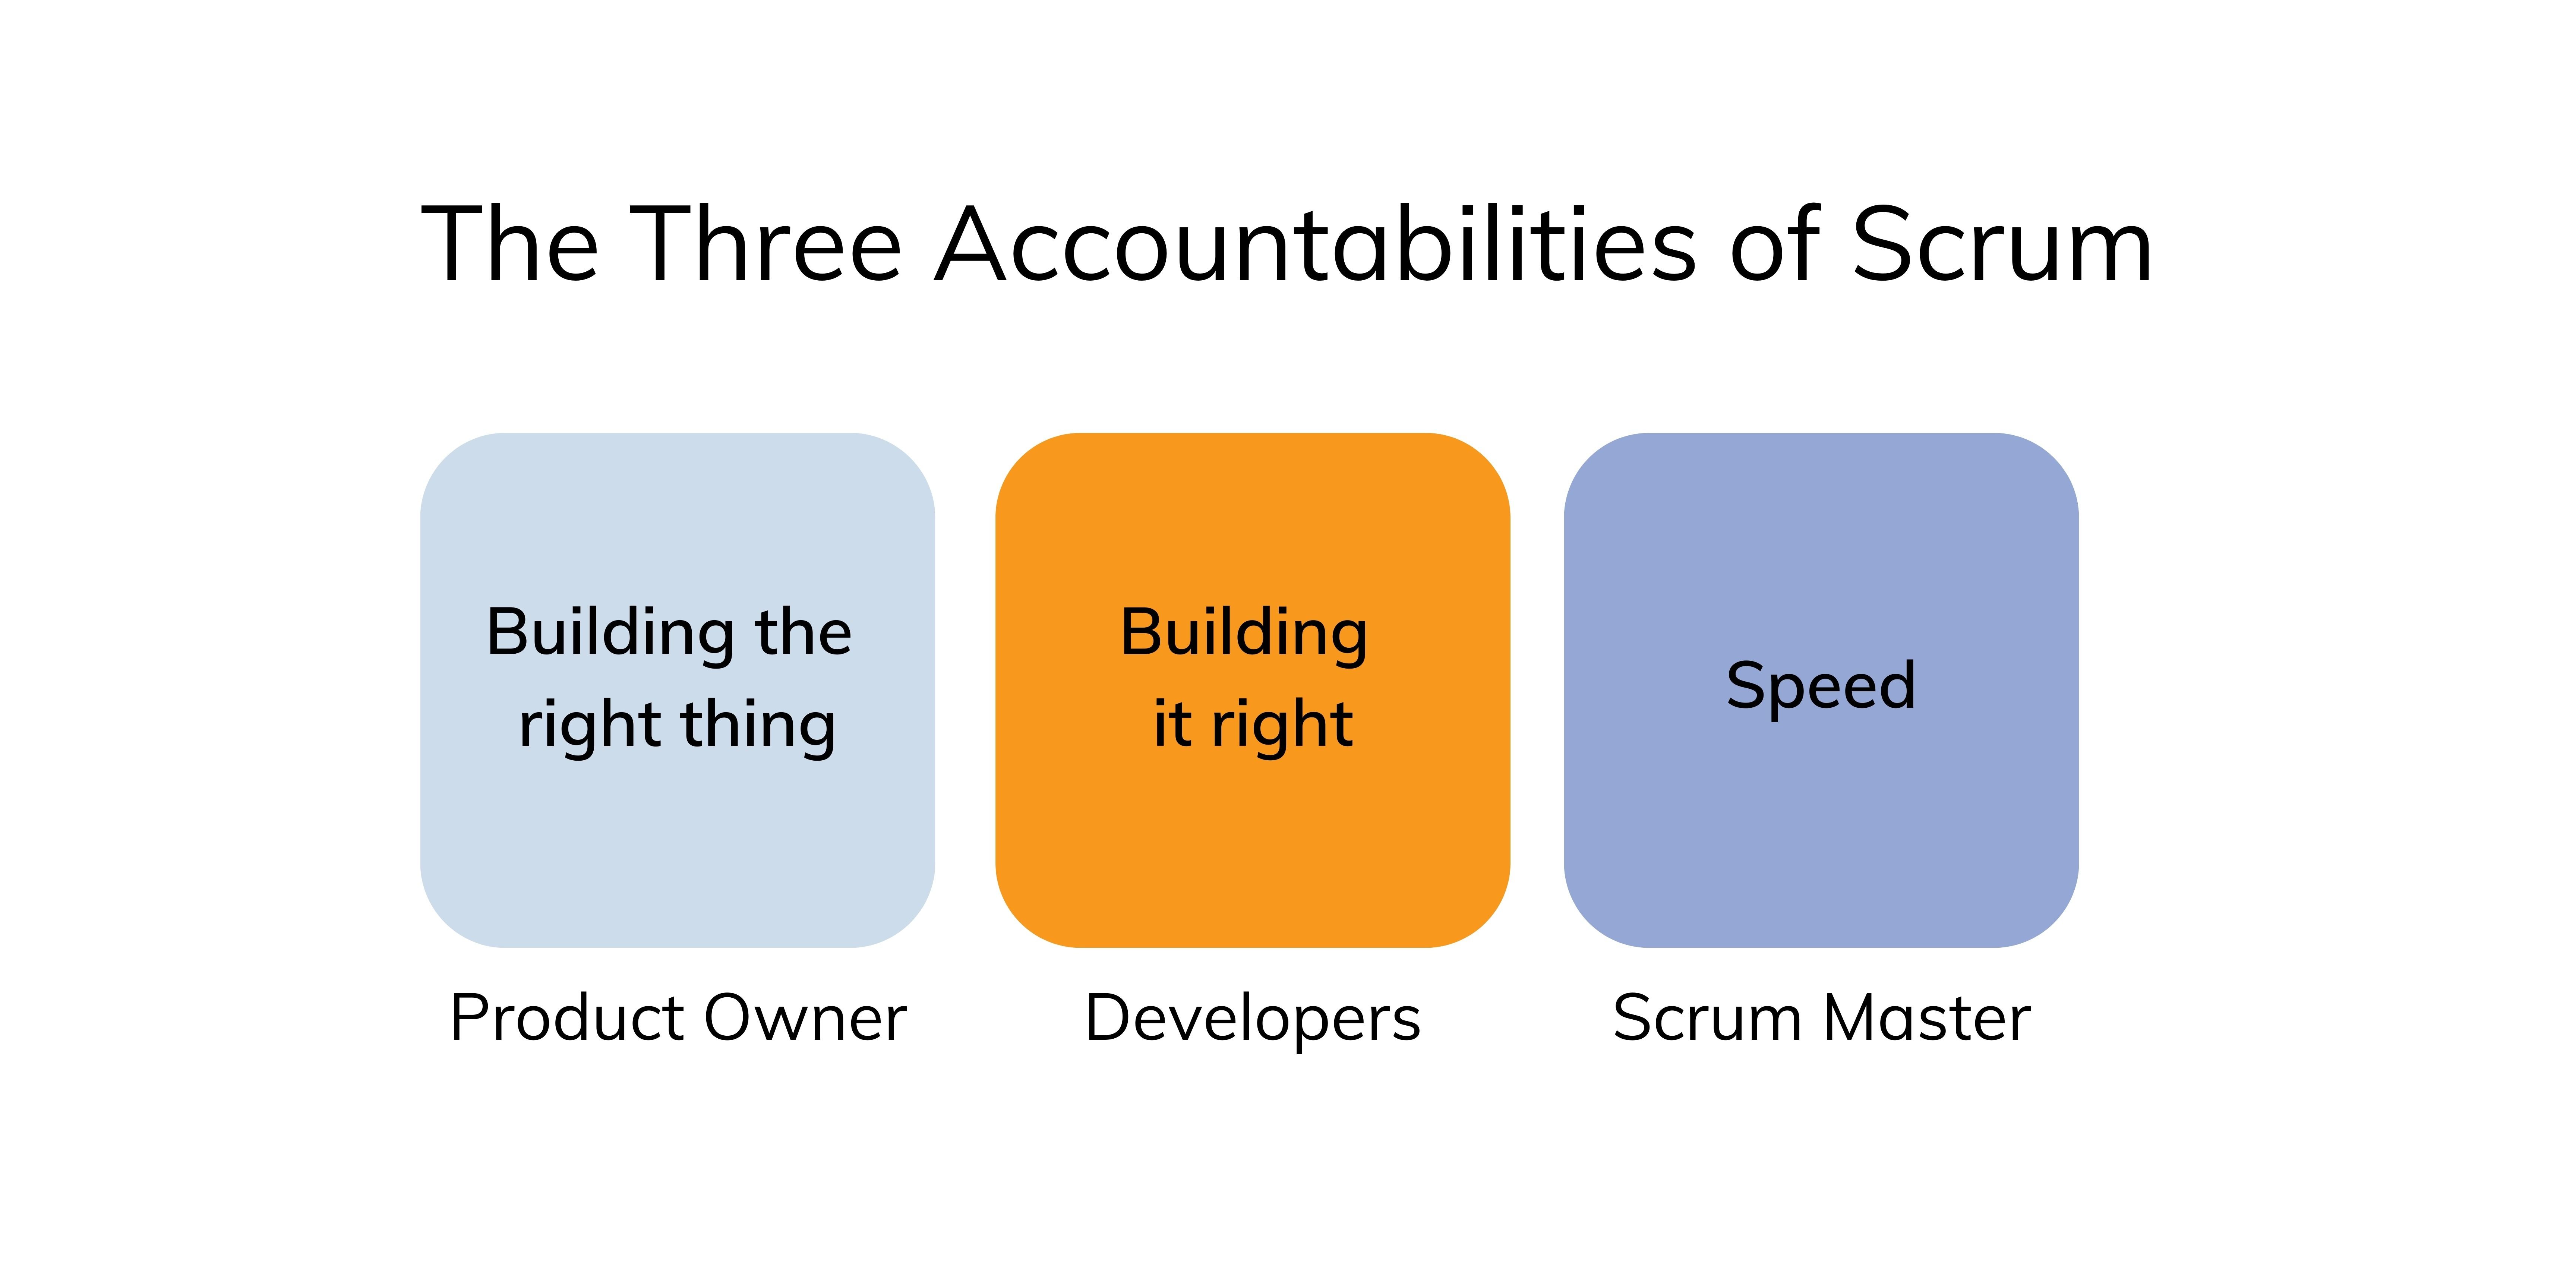 The Three Accountabilities of Scrum: Product Owner, Developers, Scrum Master